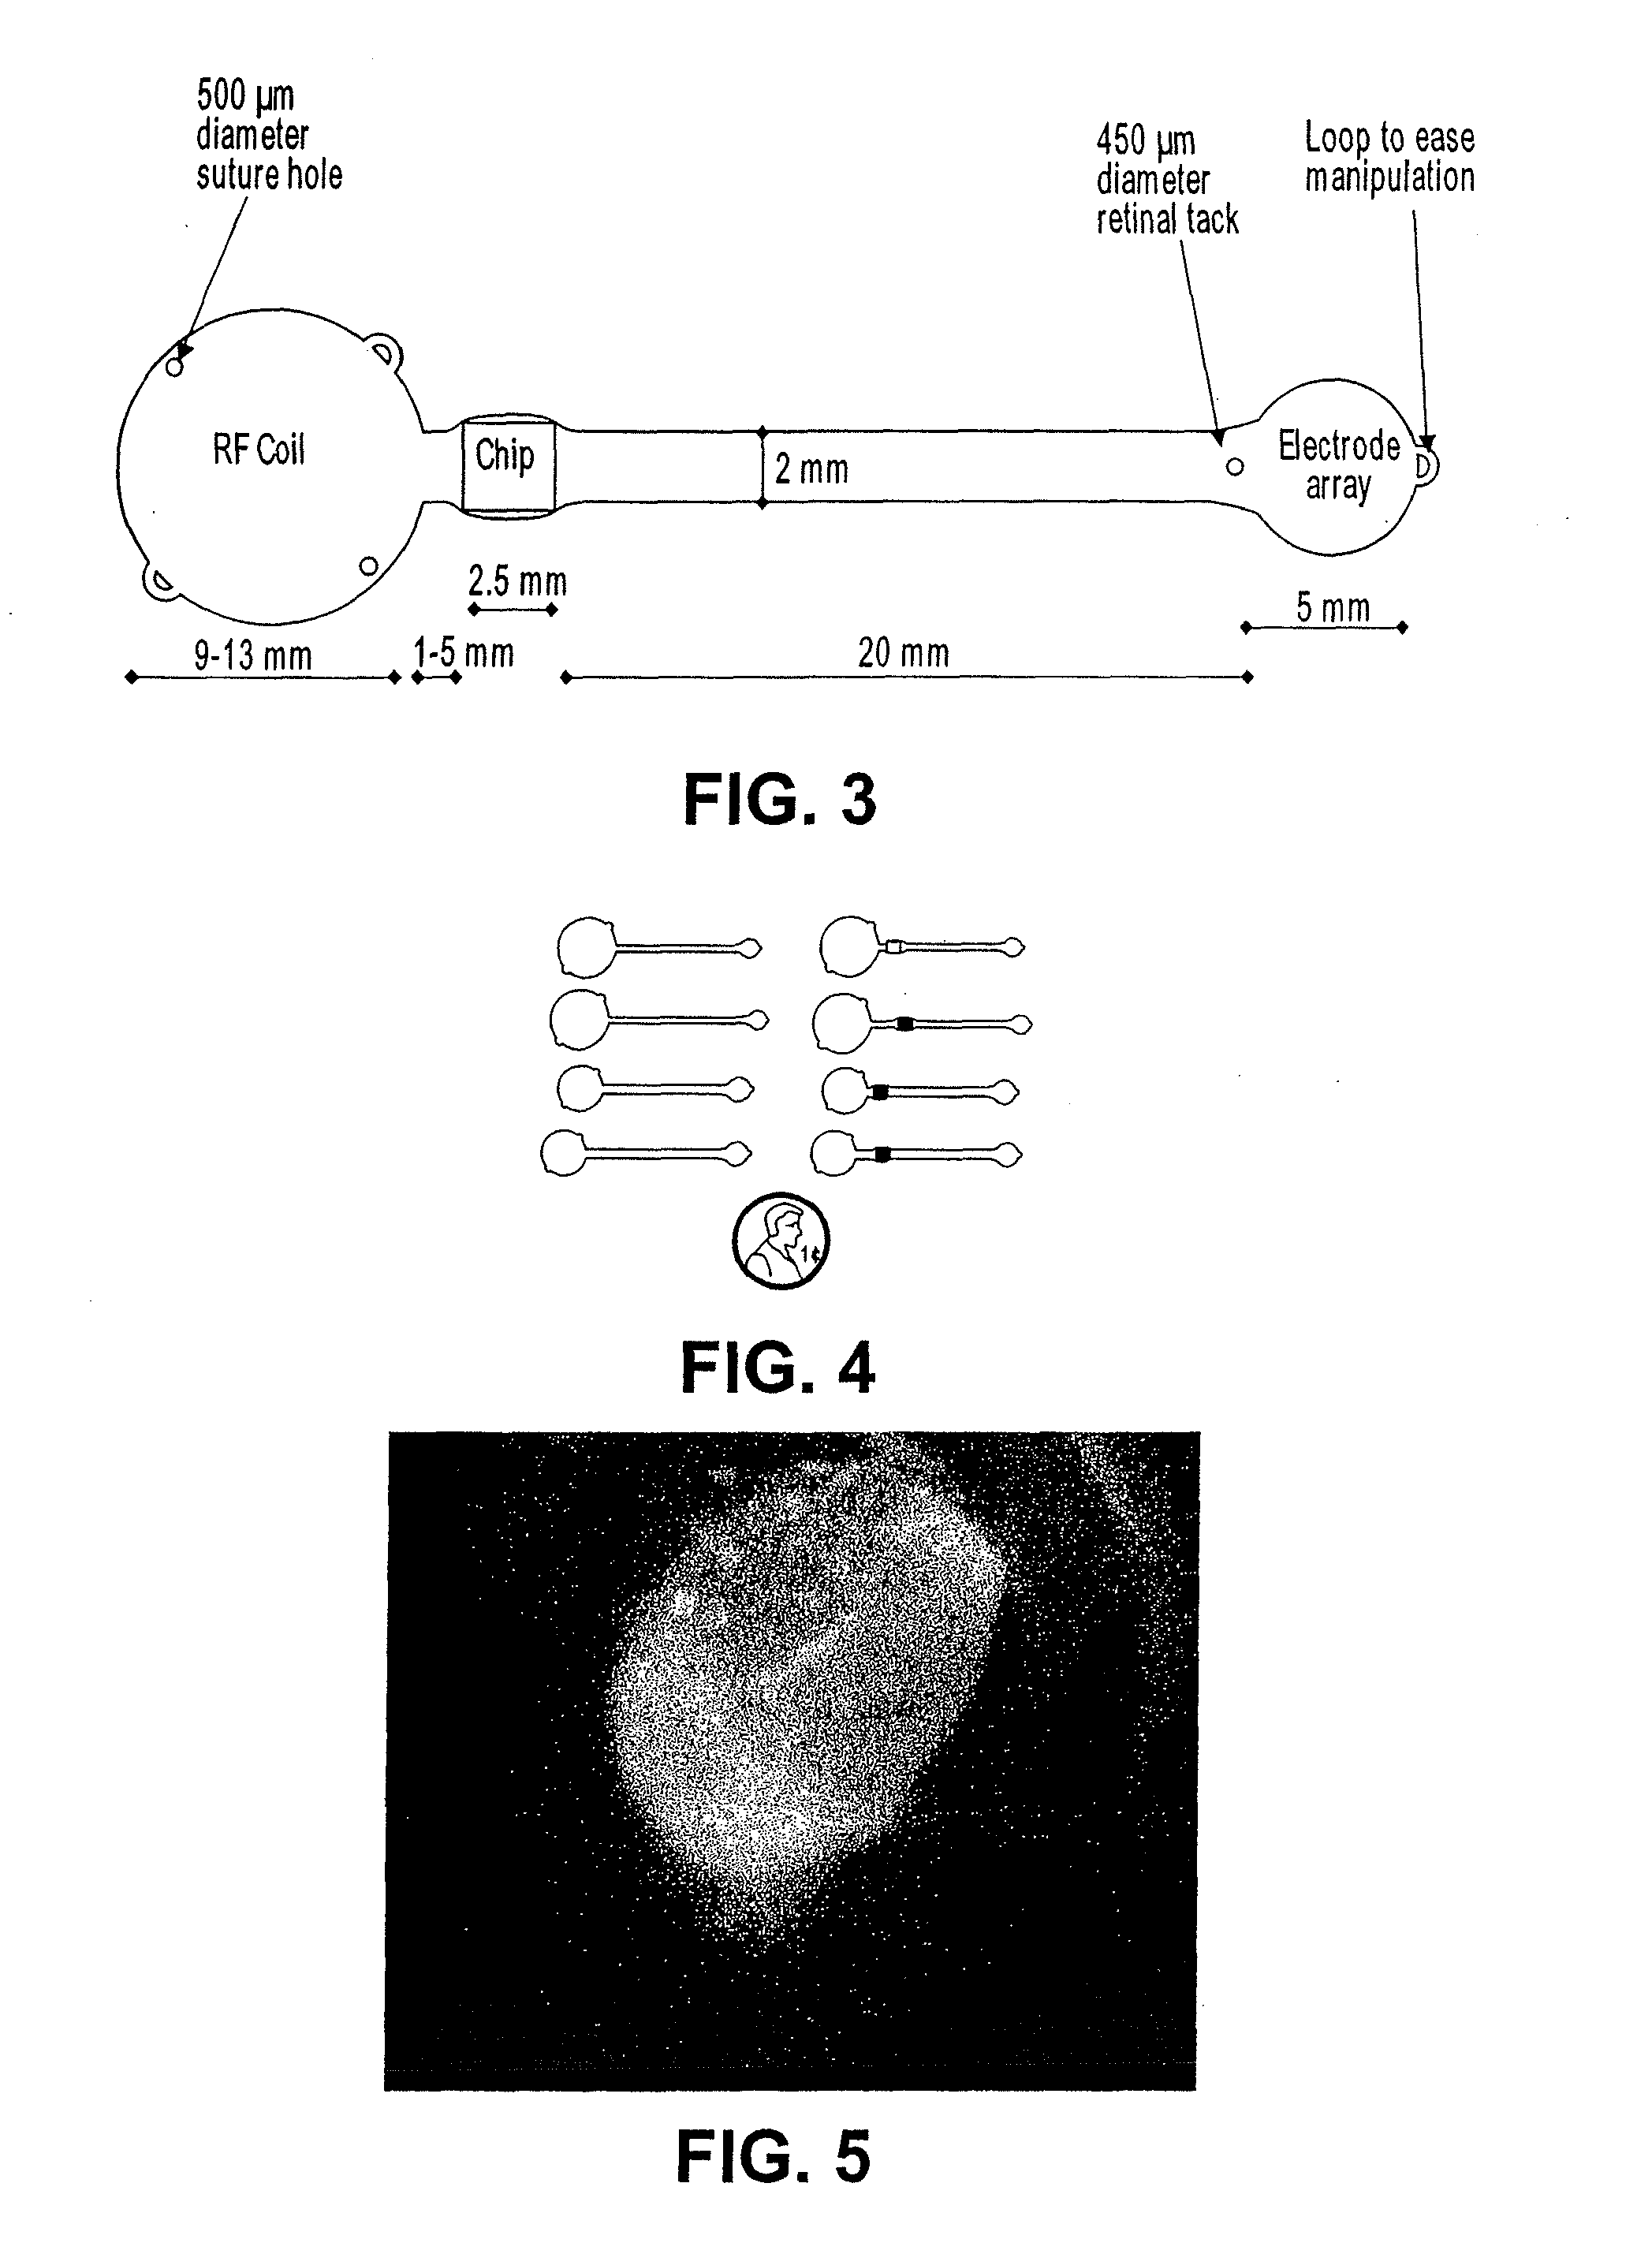 Method of fabricating an integrated intraocular retinal prosthesis device